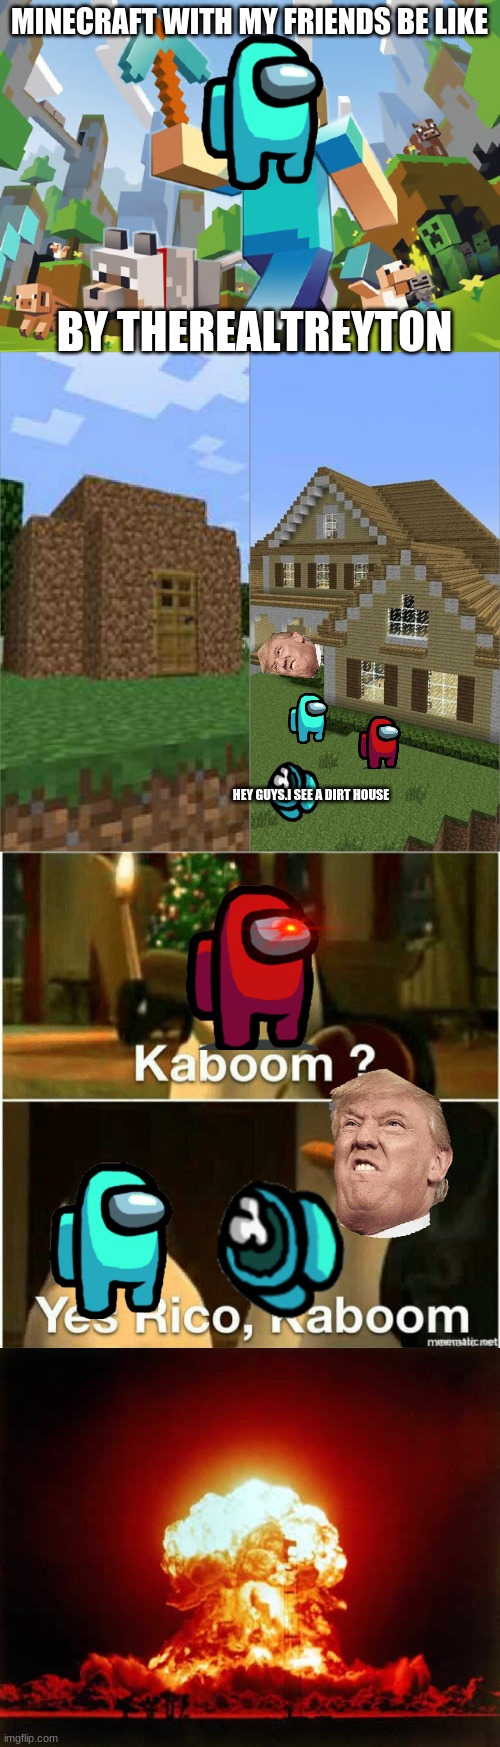 minecraft with my friends be like | MINECRAFT WITH MY FRIENDS BE LIKE; BY THEREALTREYTON; HEY GUYS.I SEE A DIRT HOUSE | image tagged in minecraft,minecraft house battle,kaboom yes rico kaboom,memes,nuclear explosion | made w/ Imgflip meme maker